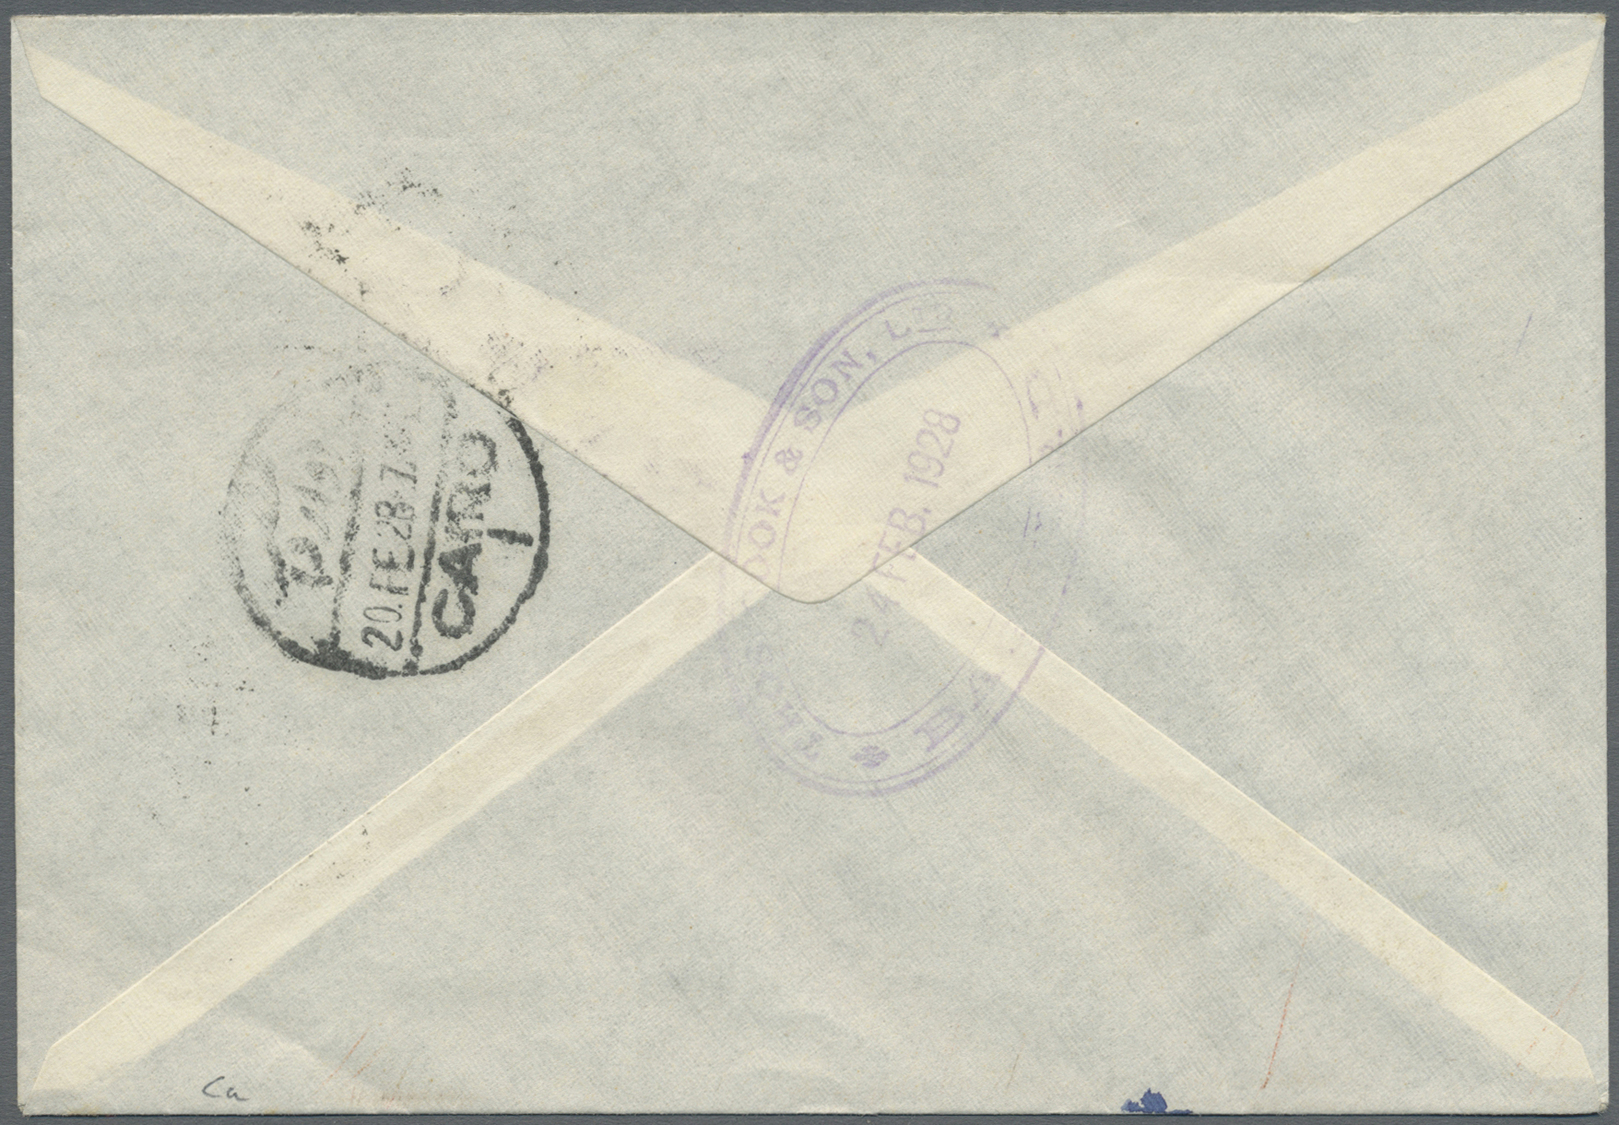 Br Ägypten: 1928 Illustrated 'Mena House Hotel Pyramids, Cairo' Envelope Used By Thomas Cook & Son, Ltd. (oval D/s On Ba - 1915-1921 British Protectorate